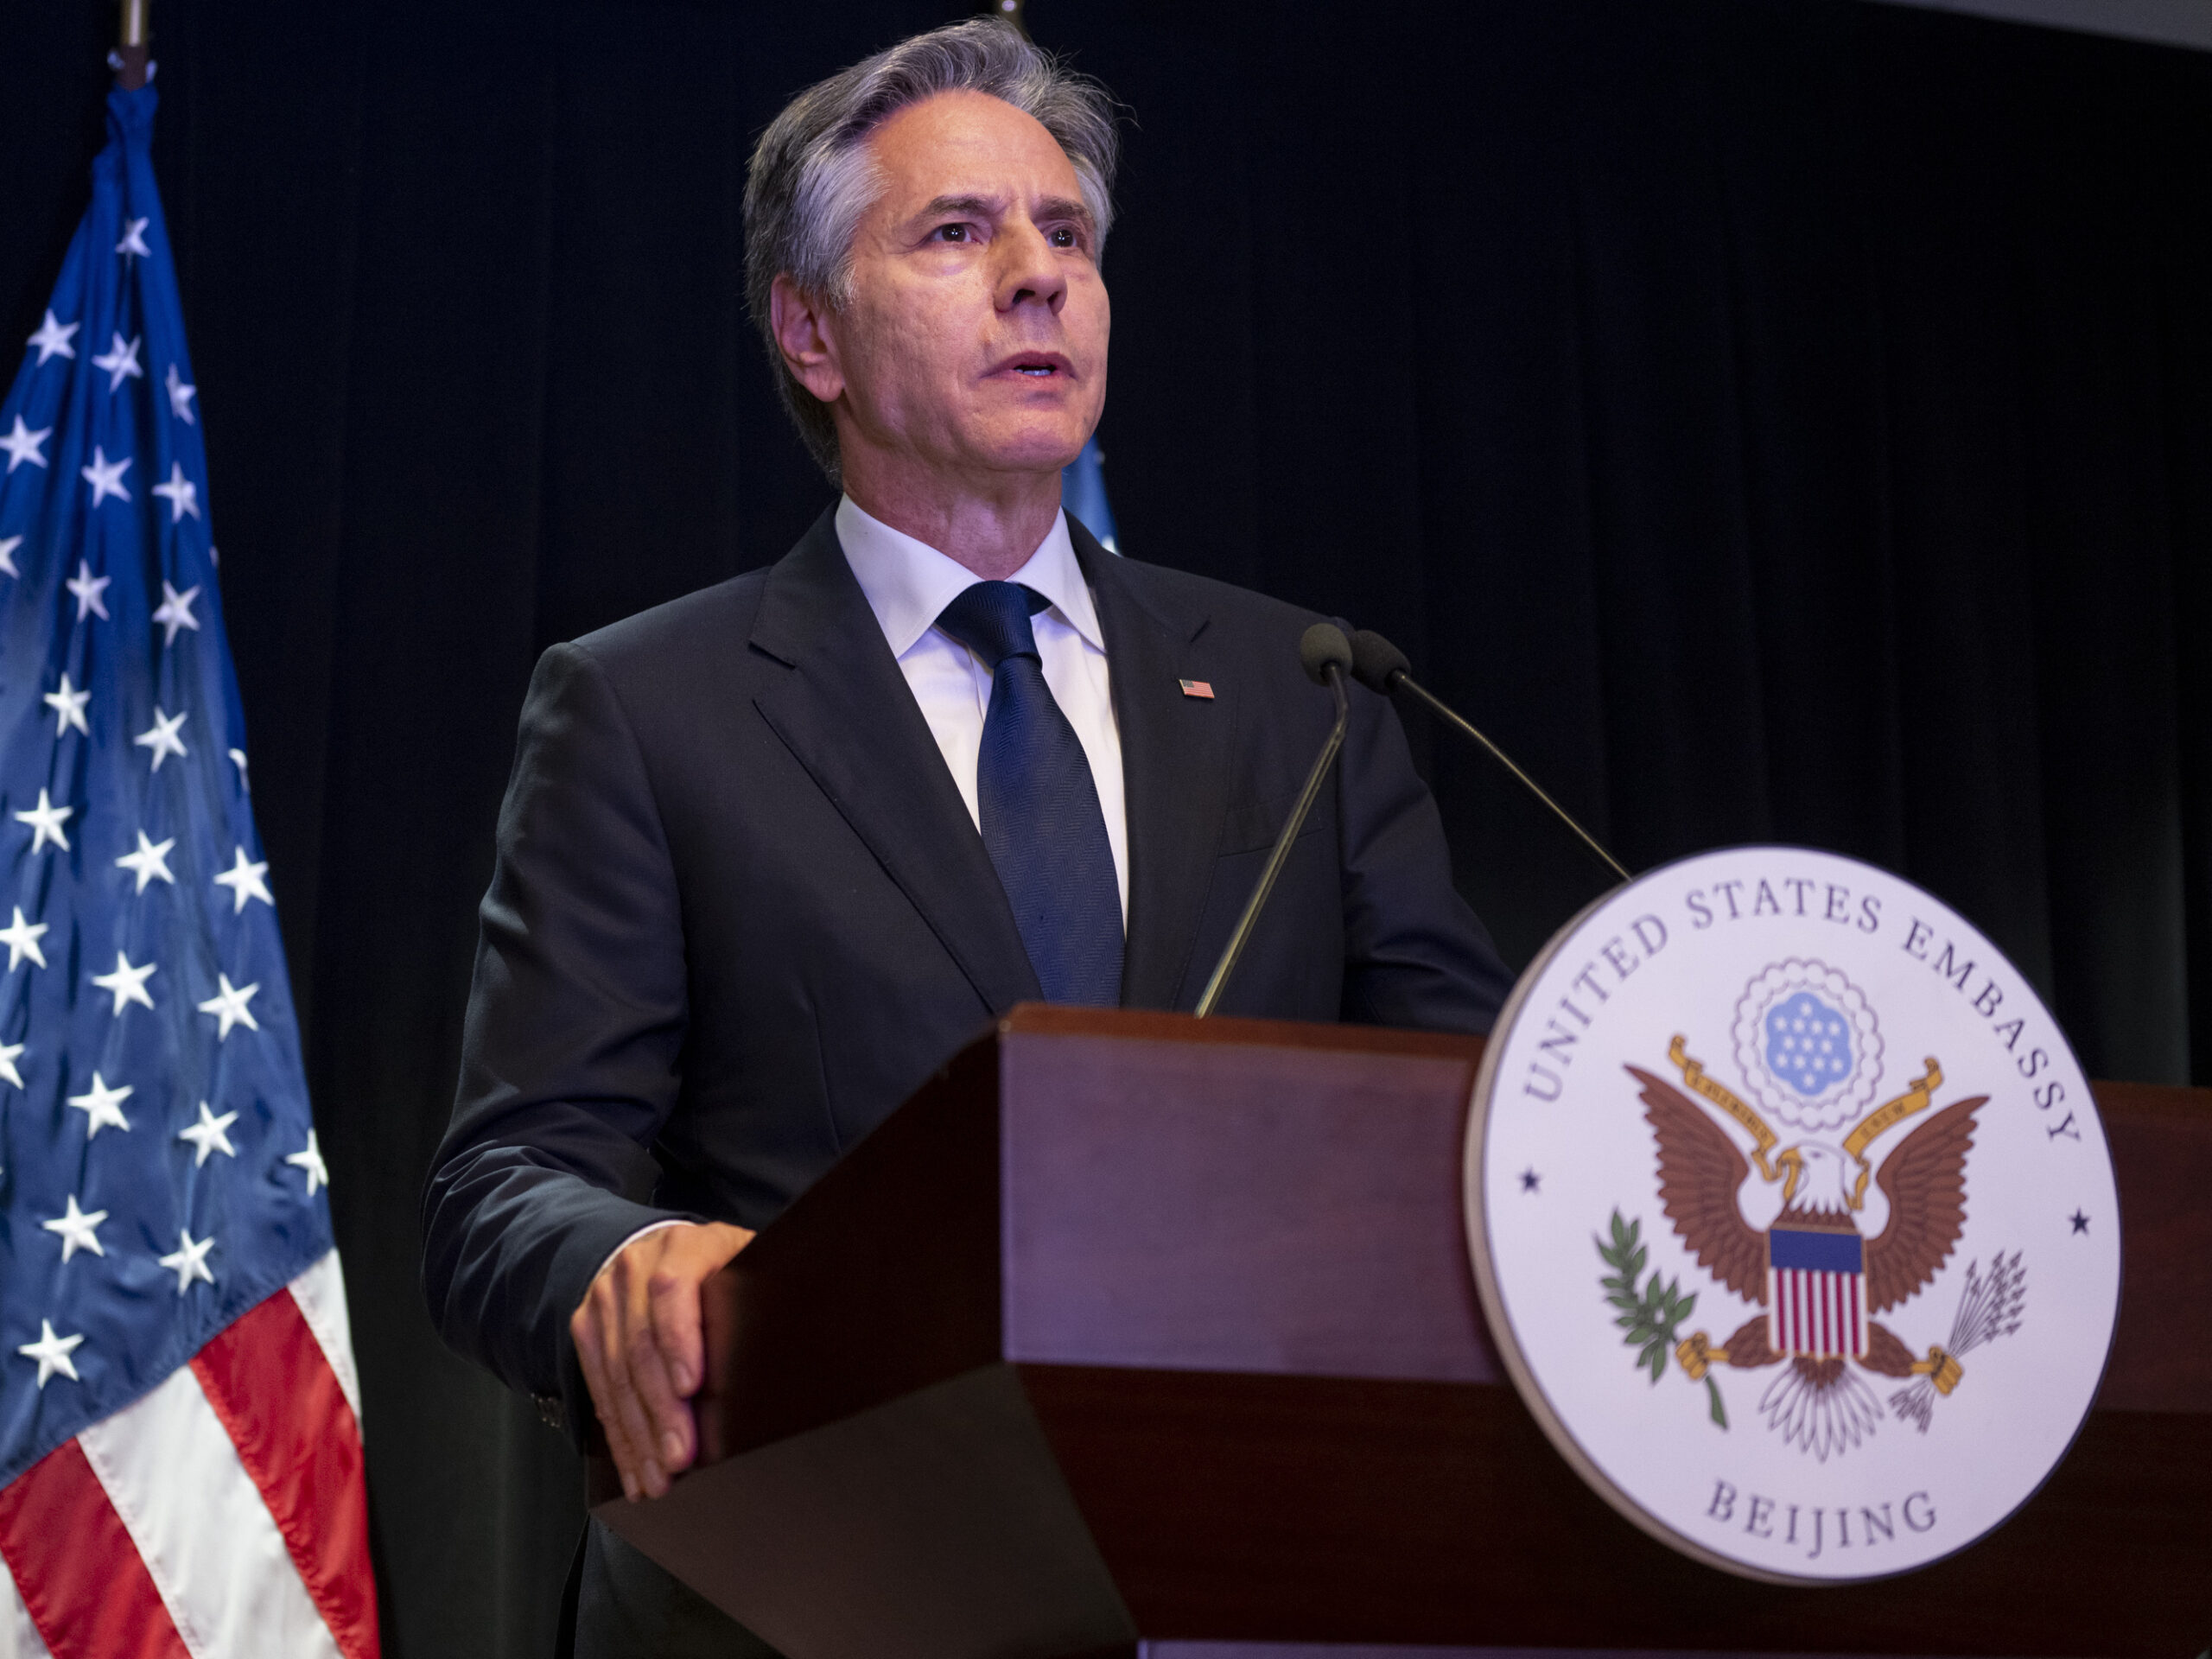 Antony Blinken, Secretary of State of the United States of America speaks at a press conference at the U.S. Embassy in Beijing, China.